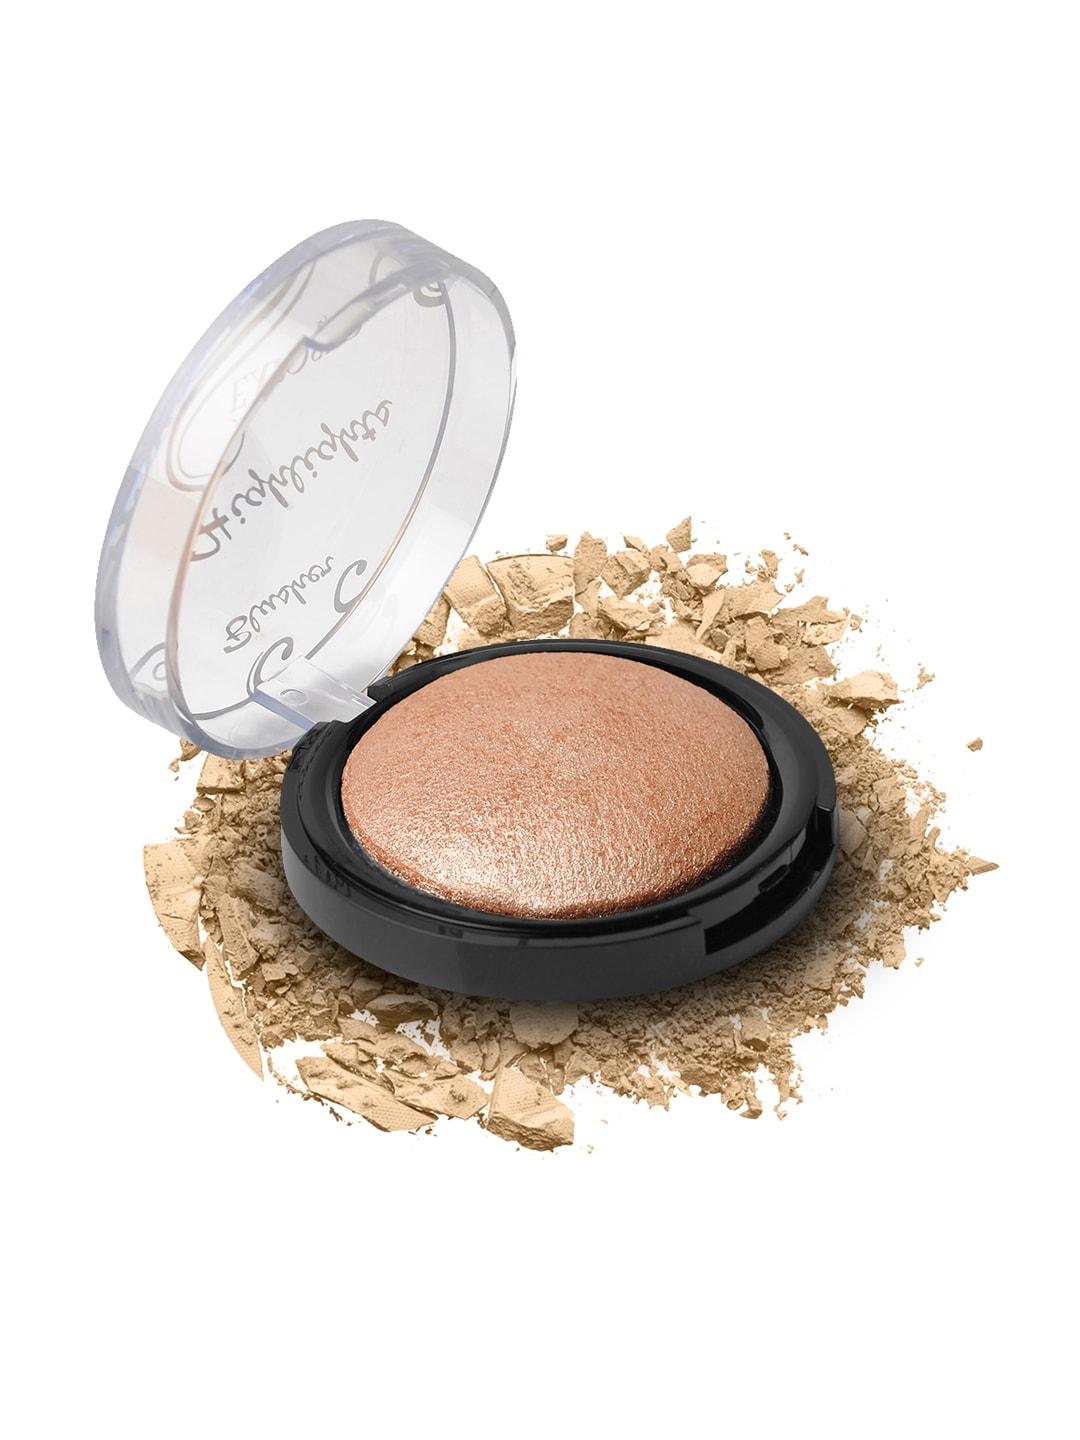 incolor exposed highlights blusher sunkissed - 06 9 g